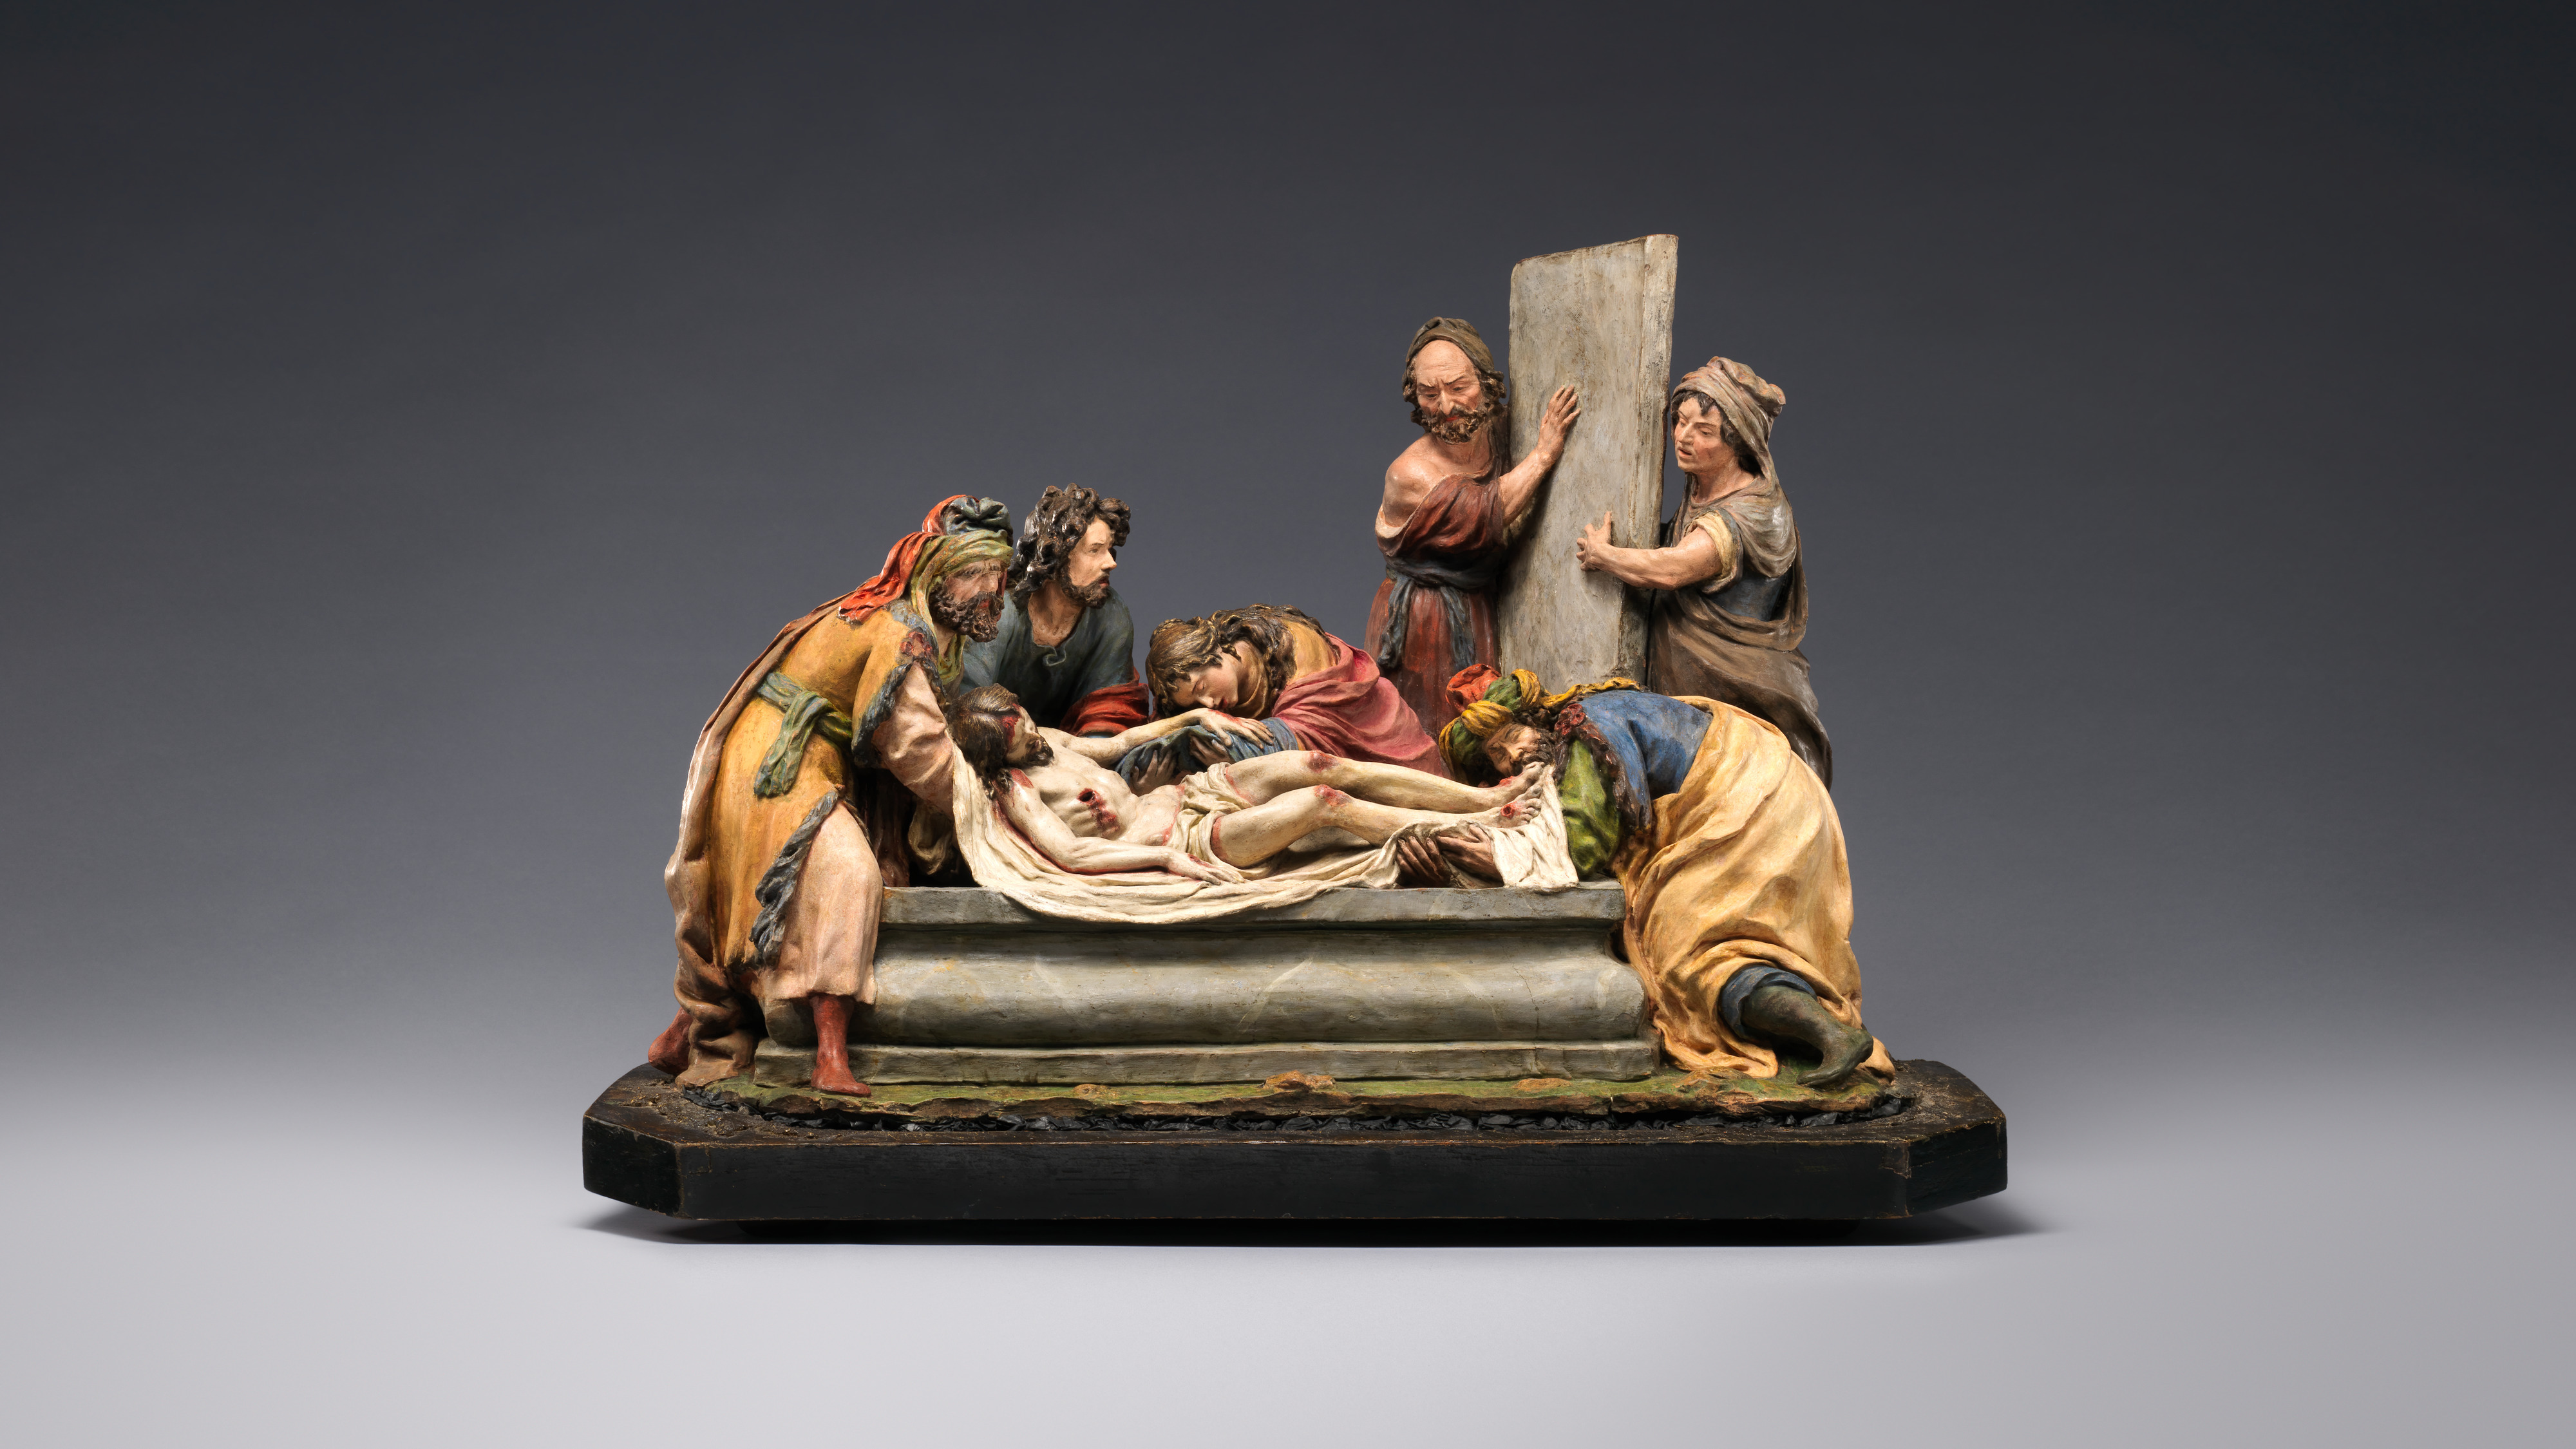 A polychrome terracotta sculpture of the entombment of Christ, who is being laid in a stone tomb by several figures. Two men hold the tomb’s cover while a third figure kisses his feet. A woman rests her face on his hand, in anguish. Two other men lift him by the shoulders. Christ is nude except for a draped cloth, which leaves the wounds of his crucifixion visible.